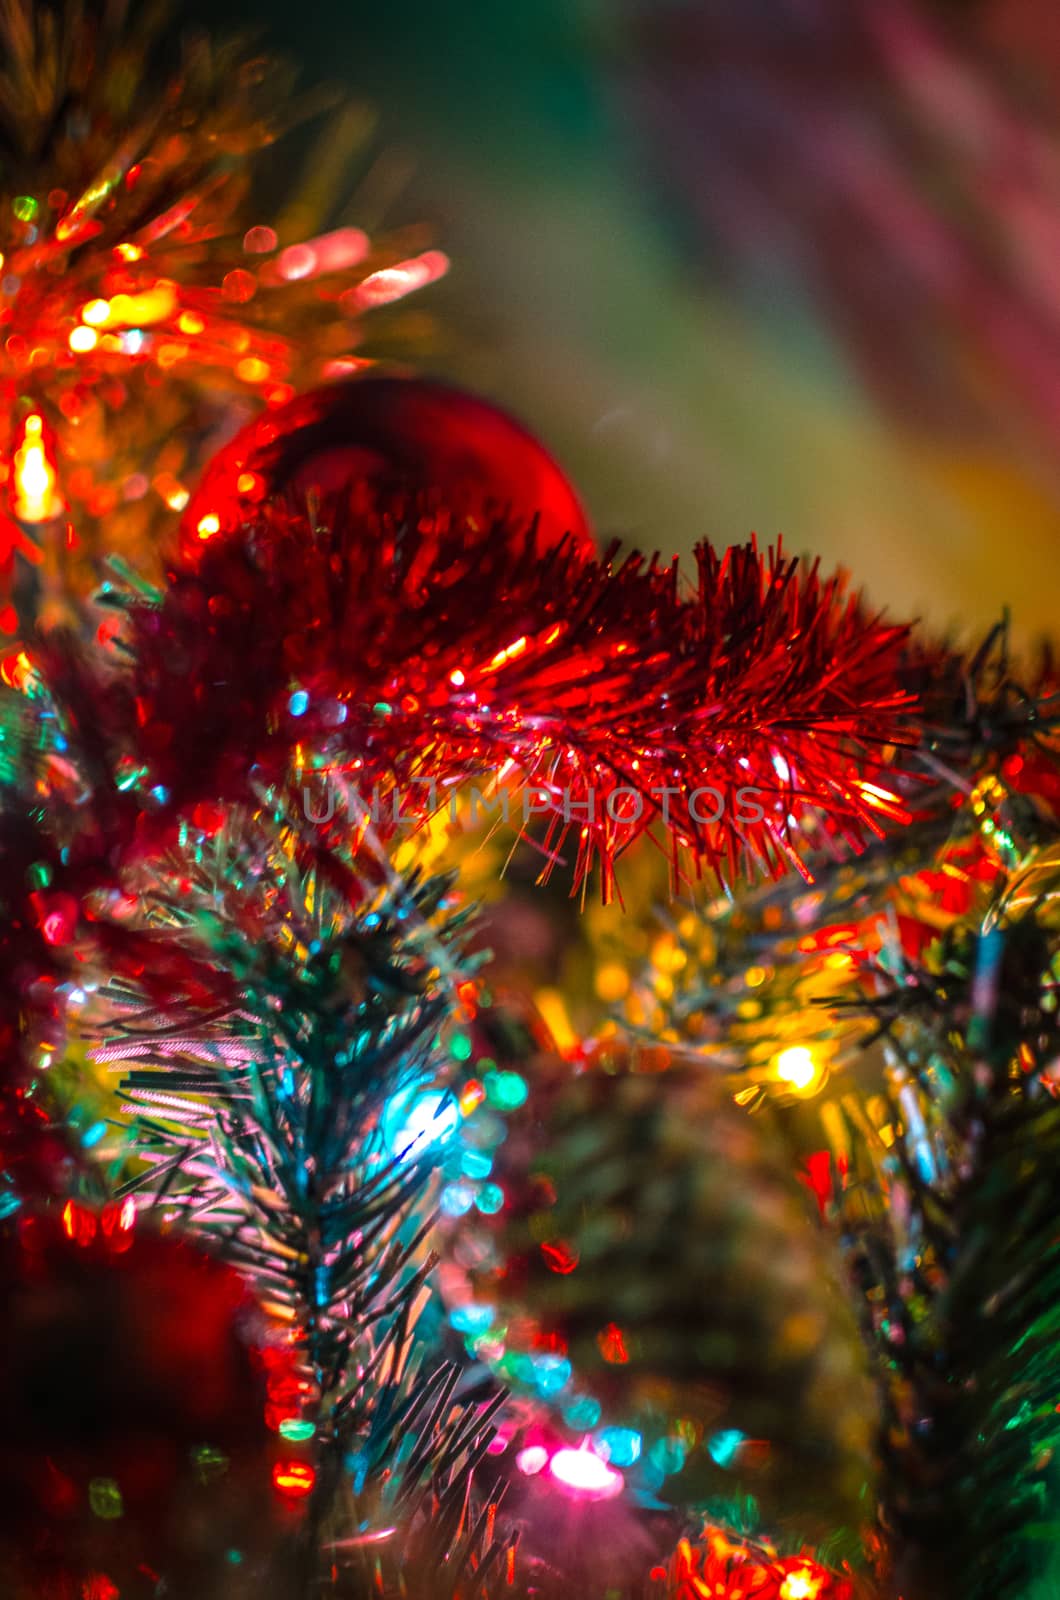 Detail of a Christmas tree where a red ball, a golden pinecone and spumillion provide a colorful scene